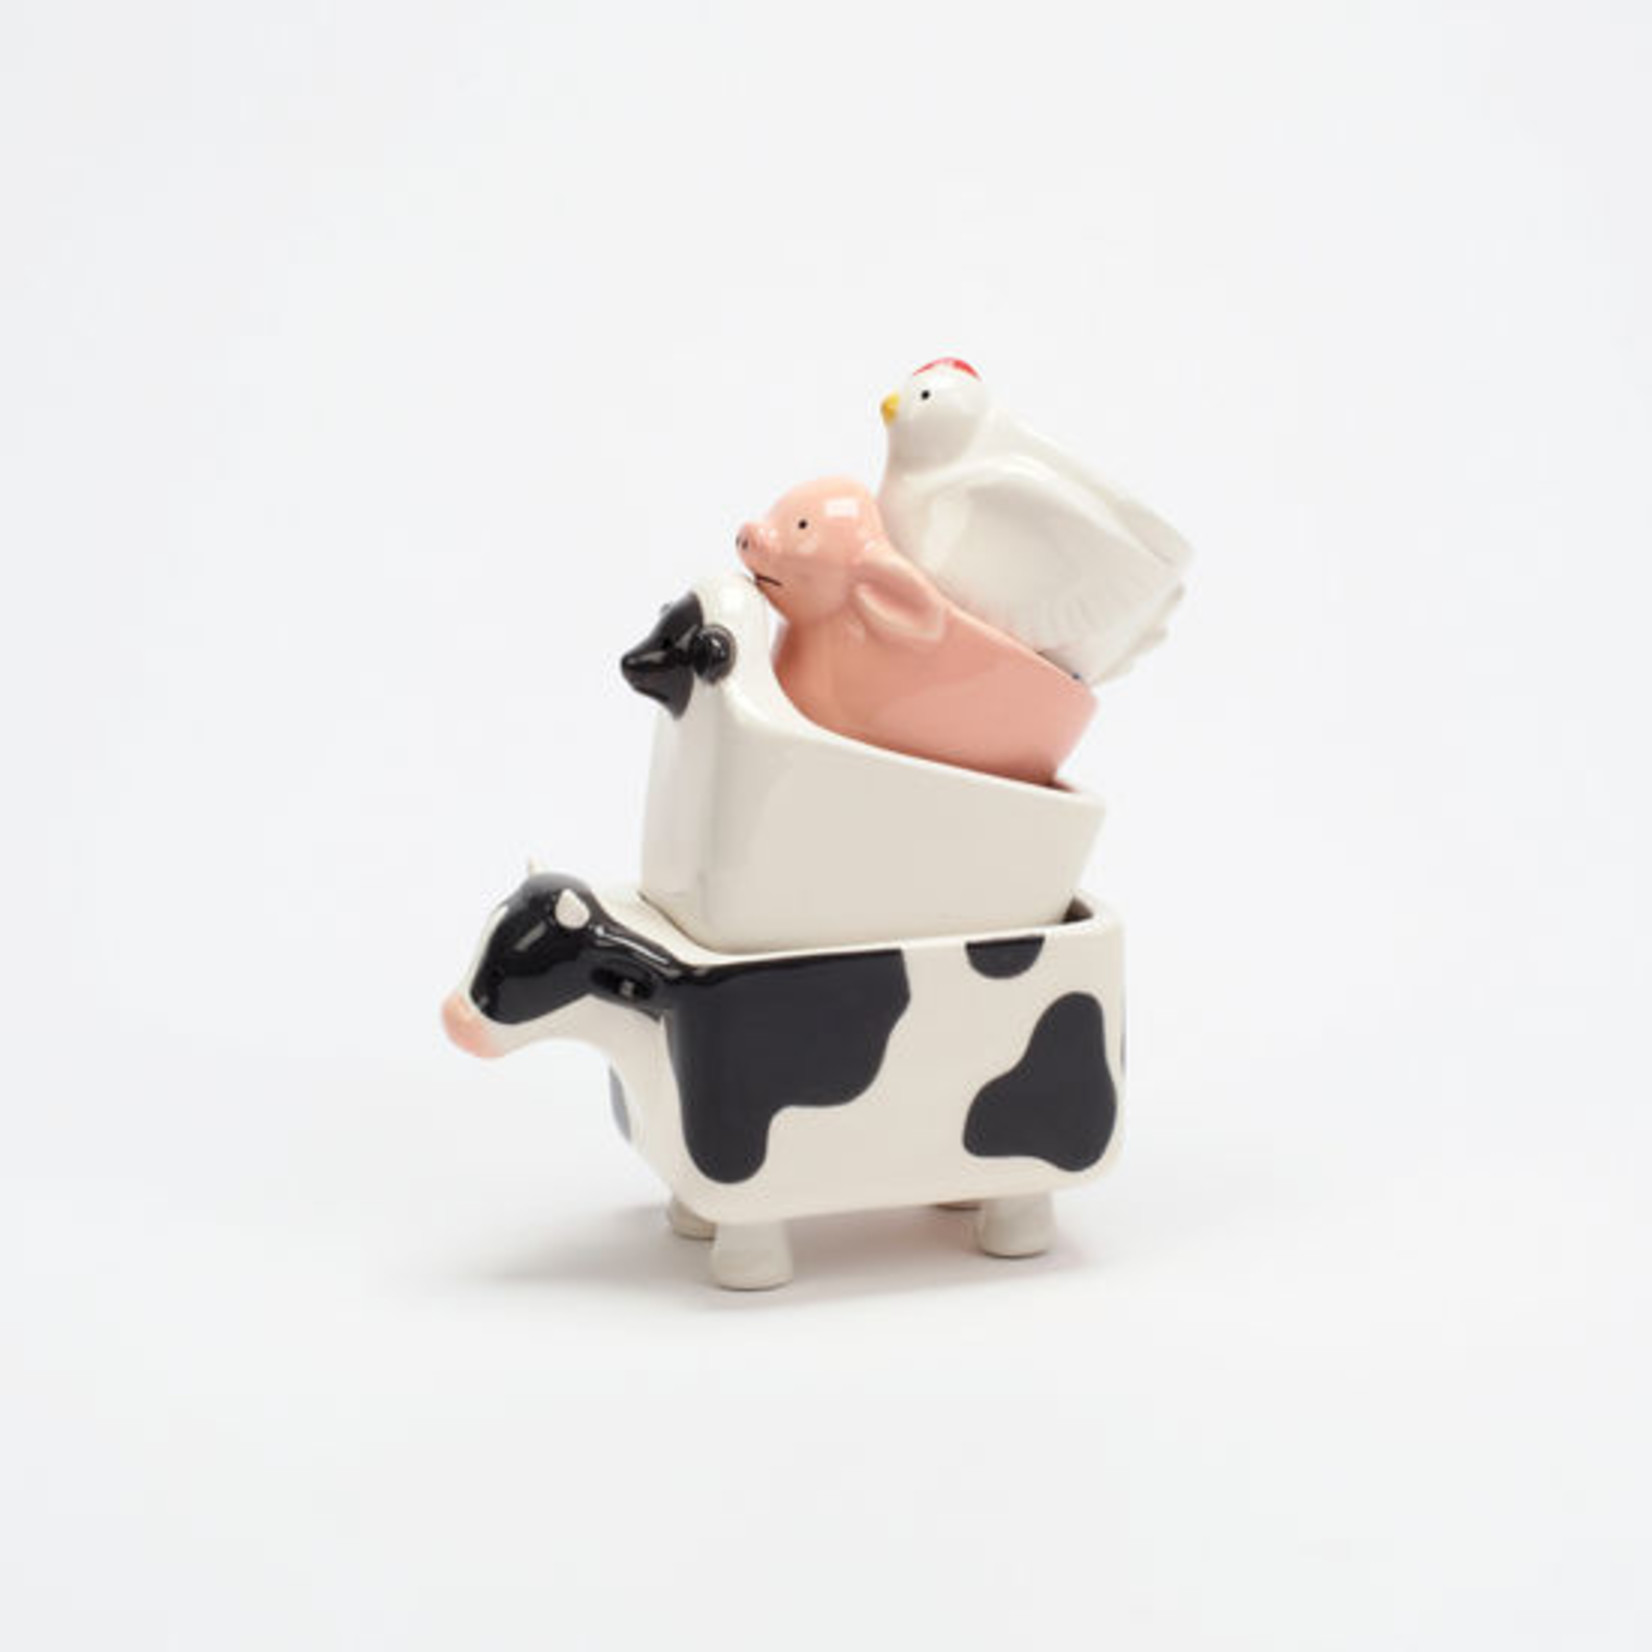 One Hundred 80 degrees Farm Animal Ceramic Measuring Cup - Set of 4